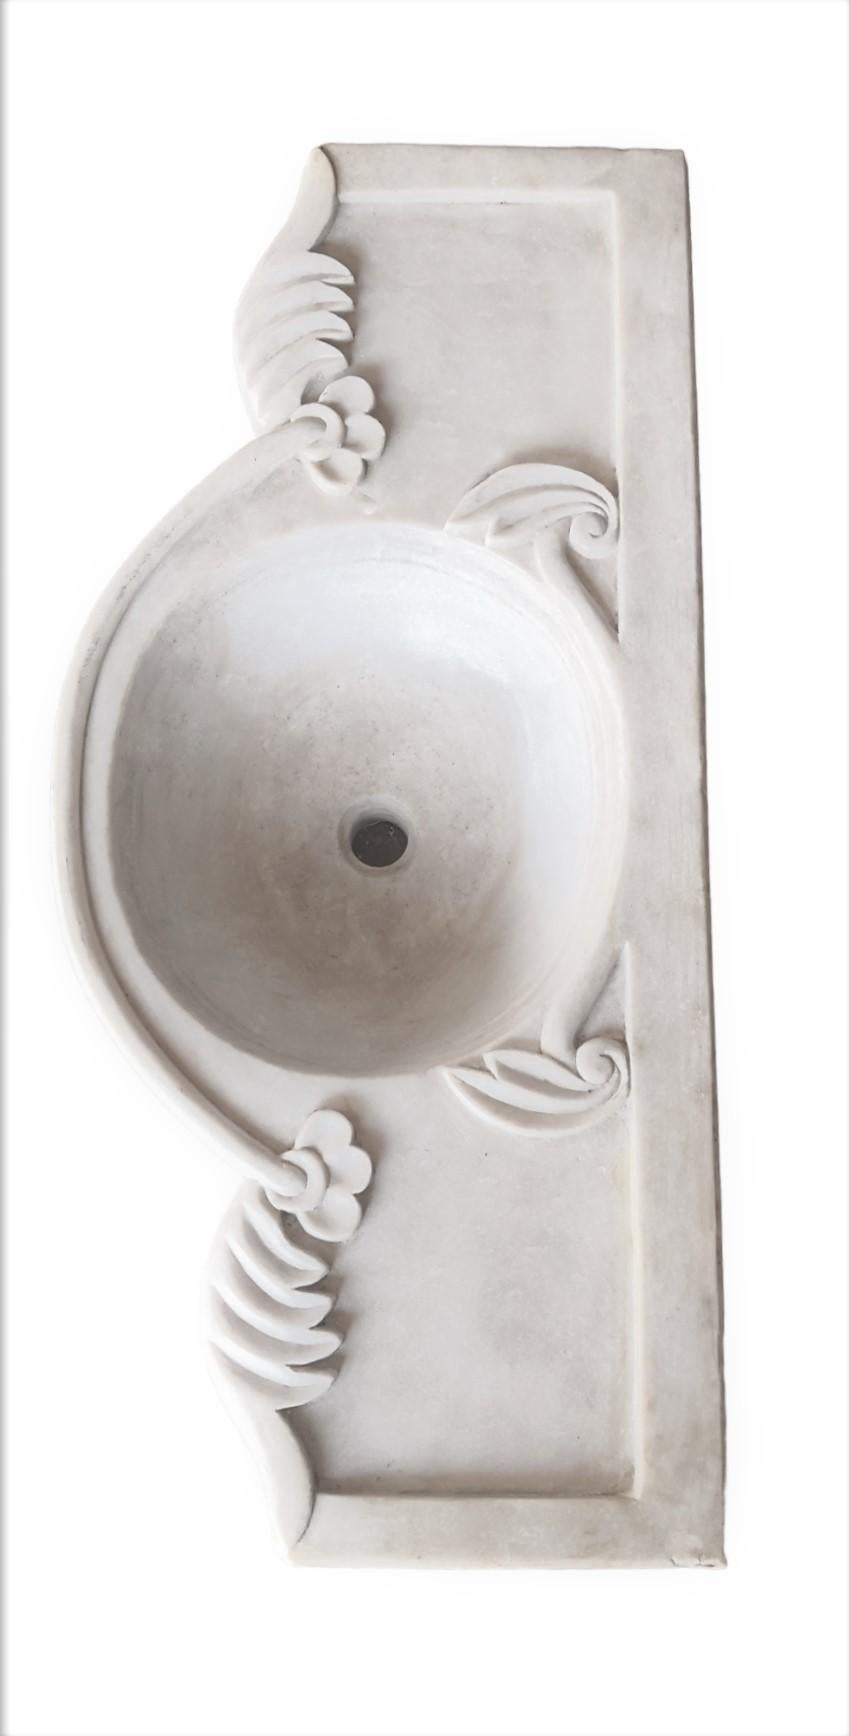 Classical hand carved marble sink basin

This timeless beautiful Italian classical sink is hand cut from one single block of white marble, these designs have not changed since Greek and Roman times and carries superb artistic merit easily fitting in